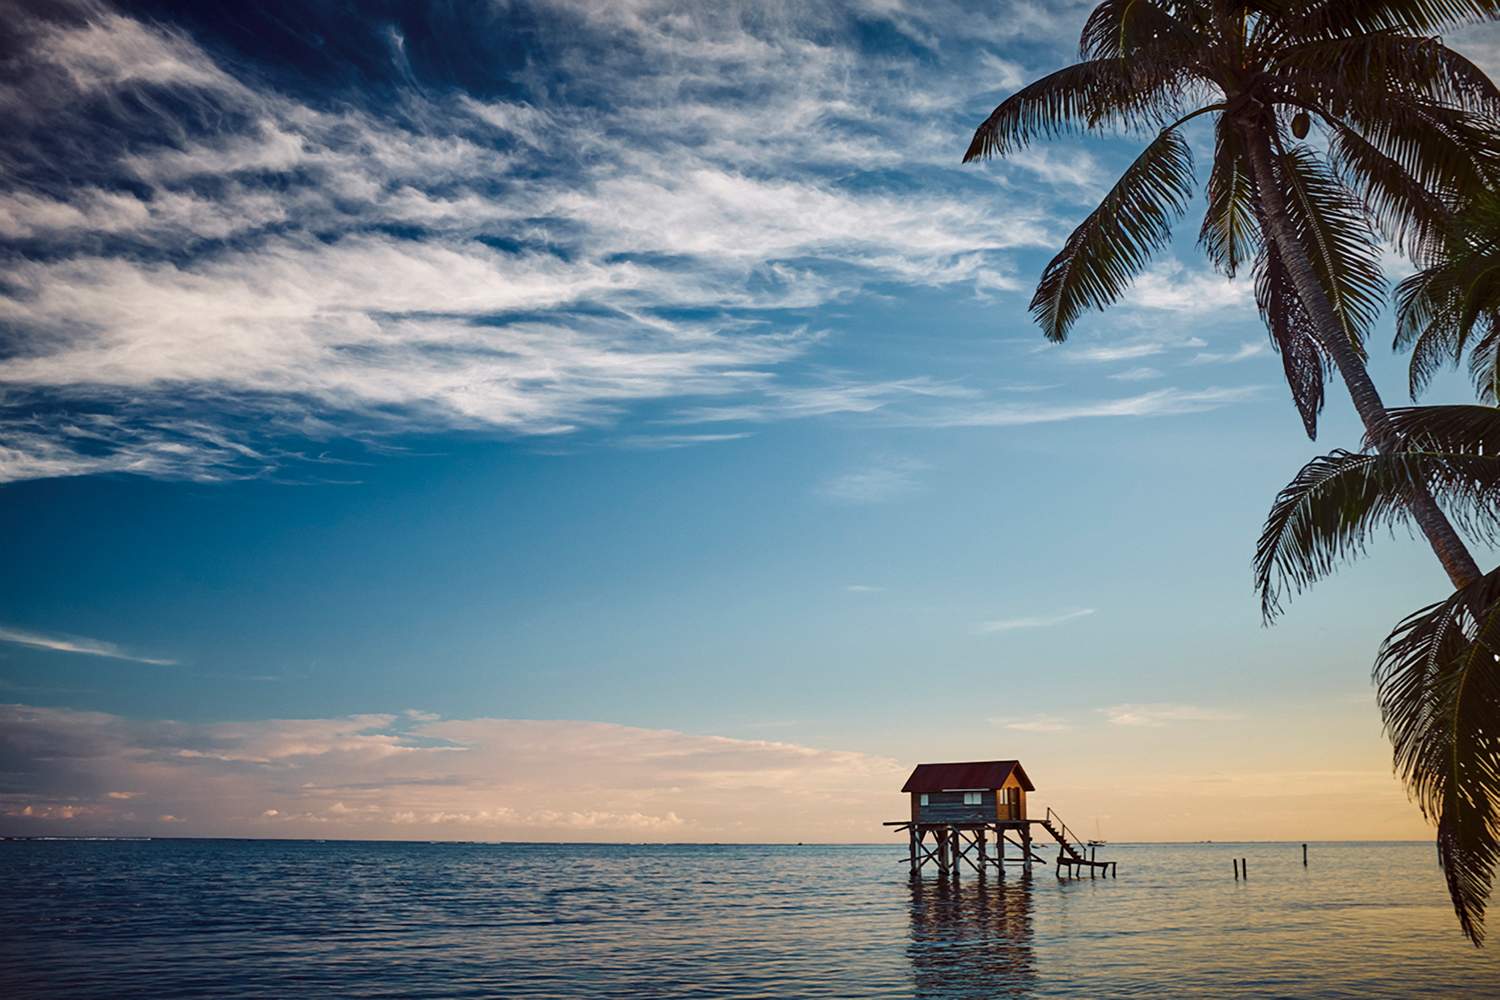 How to take great travel photos - View of the ocean in Belize